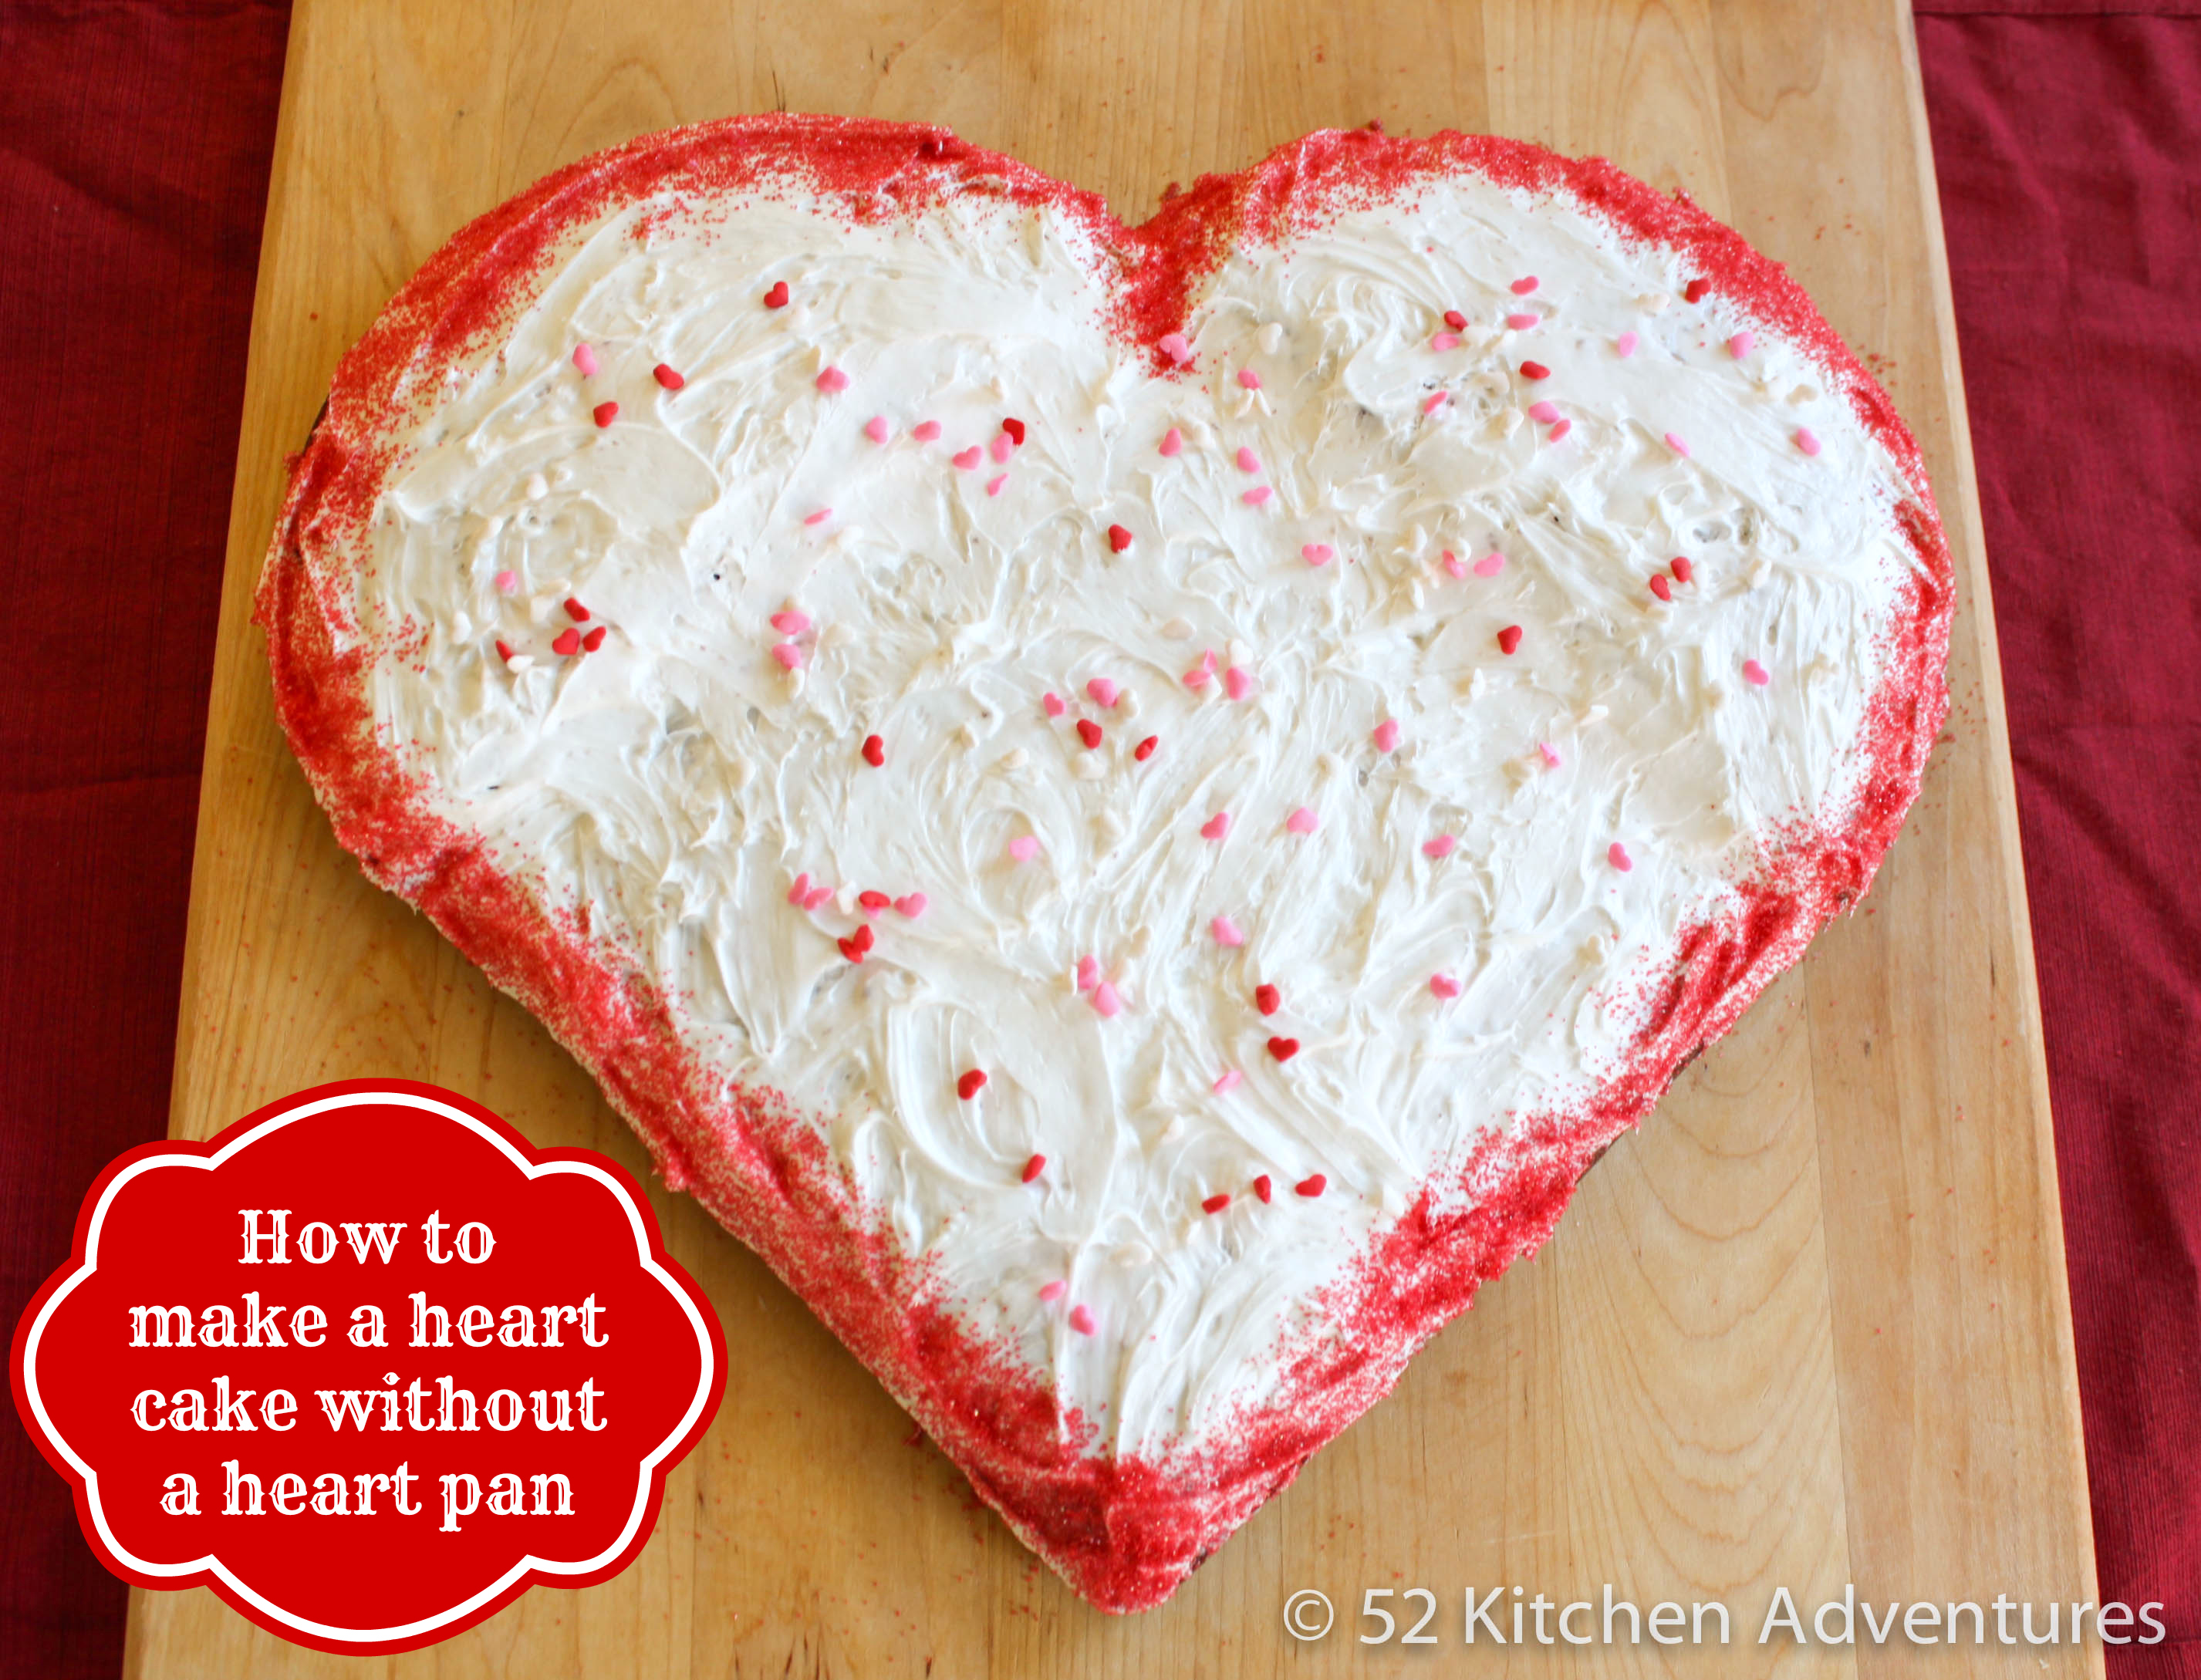 http://www.52kitchenadventures.com/wp-content/uploads/2013/02/How-to-make-a-heart-shaped-cake-without-a-heart-cake-pan.jpg